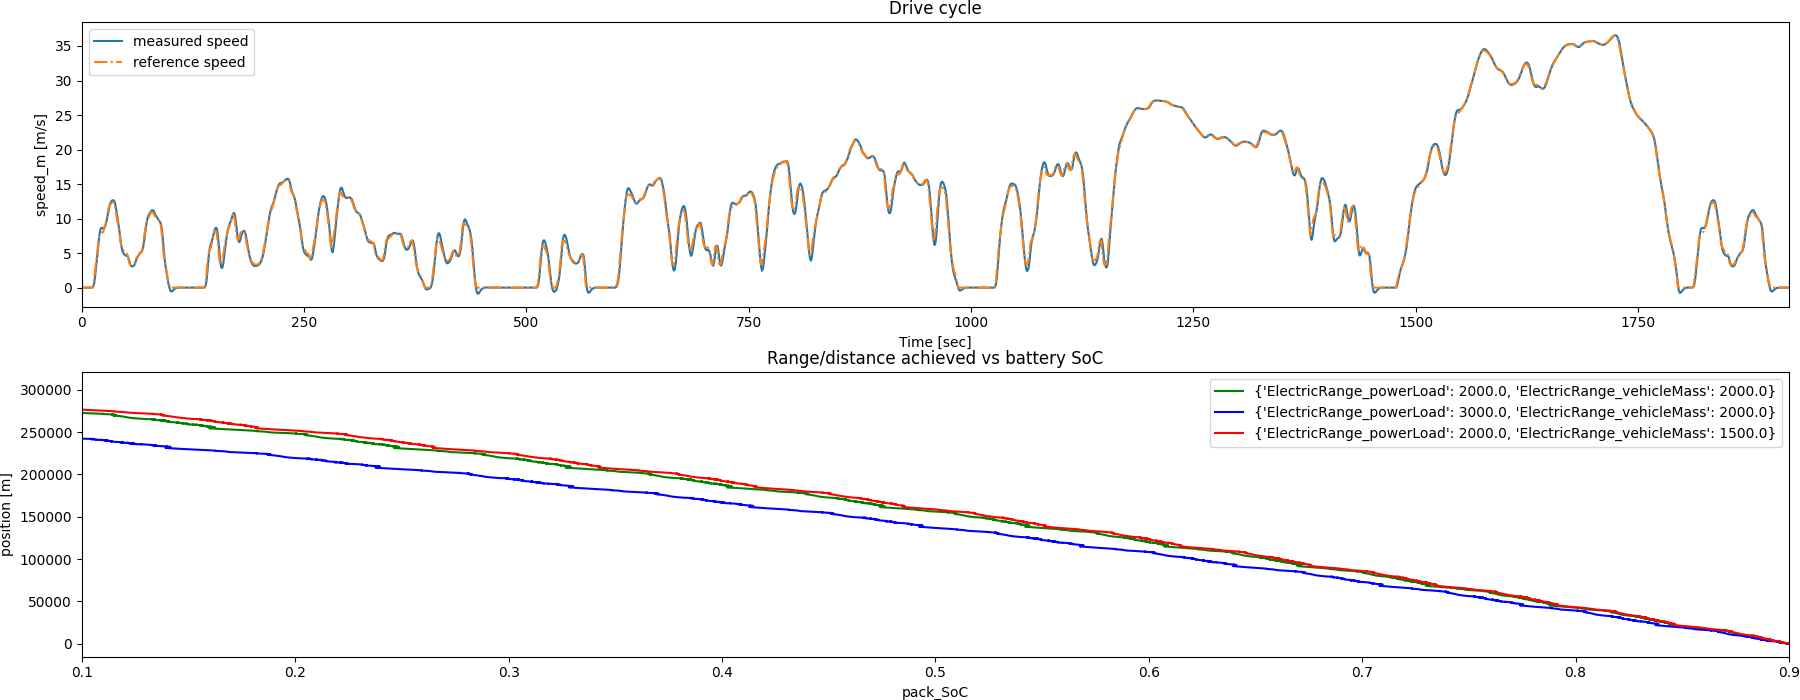 Drive cycle, Range/distance achieved vs battery SoC